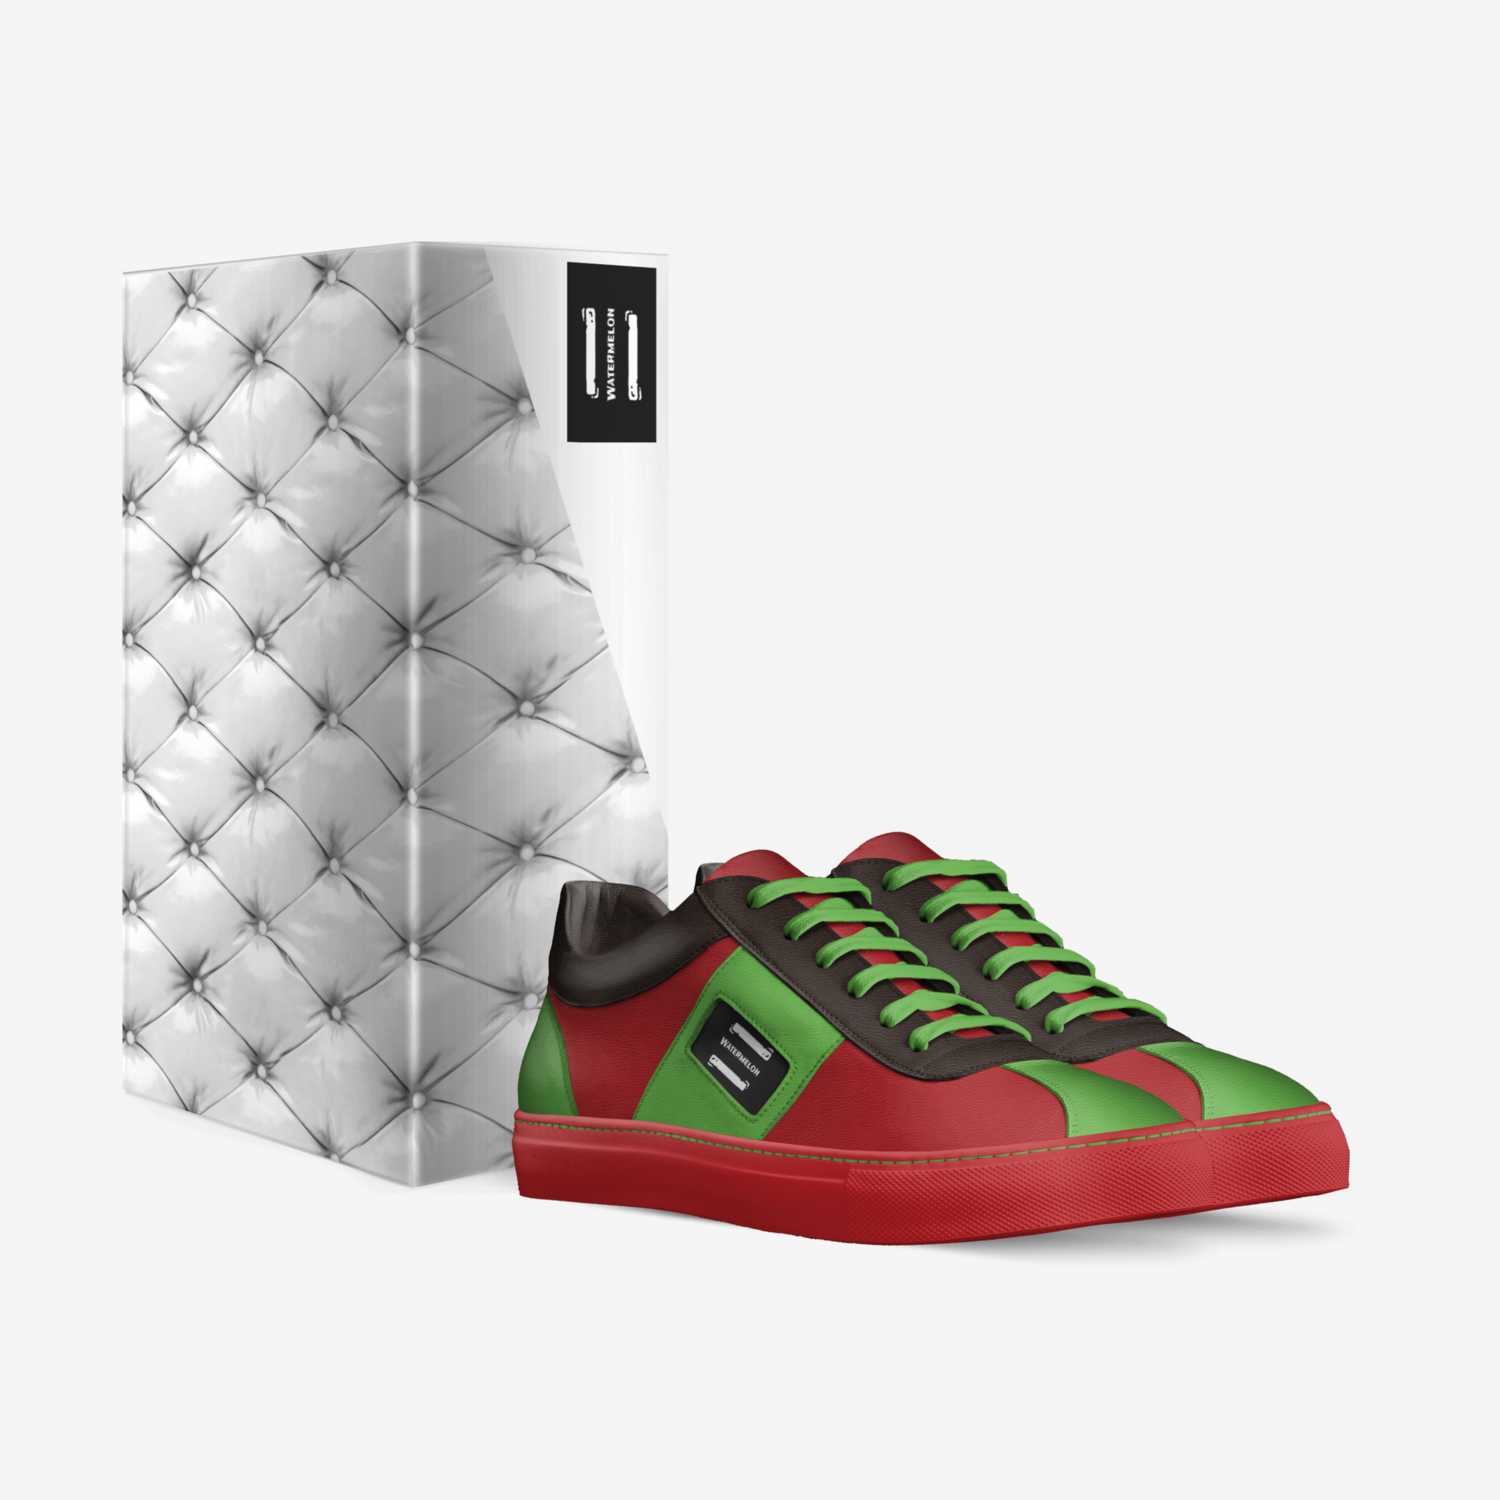 Watermelon custom made in Italy shoes by Edgar Villa | Box view